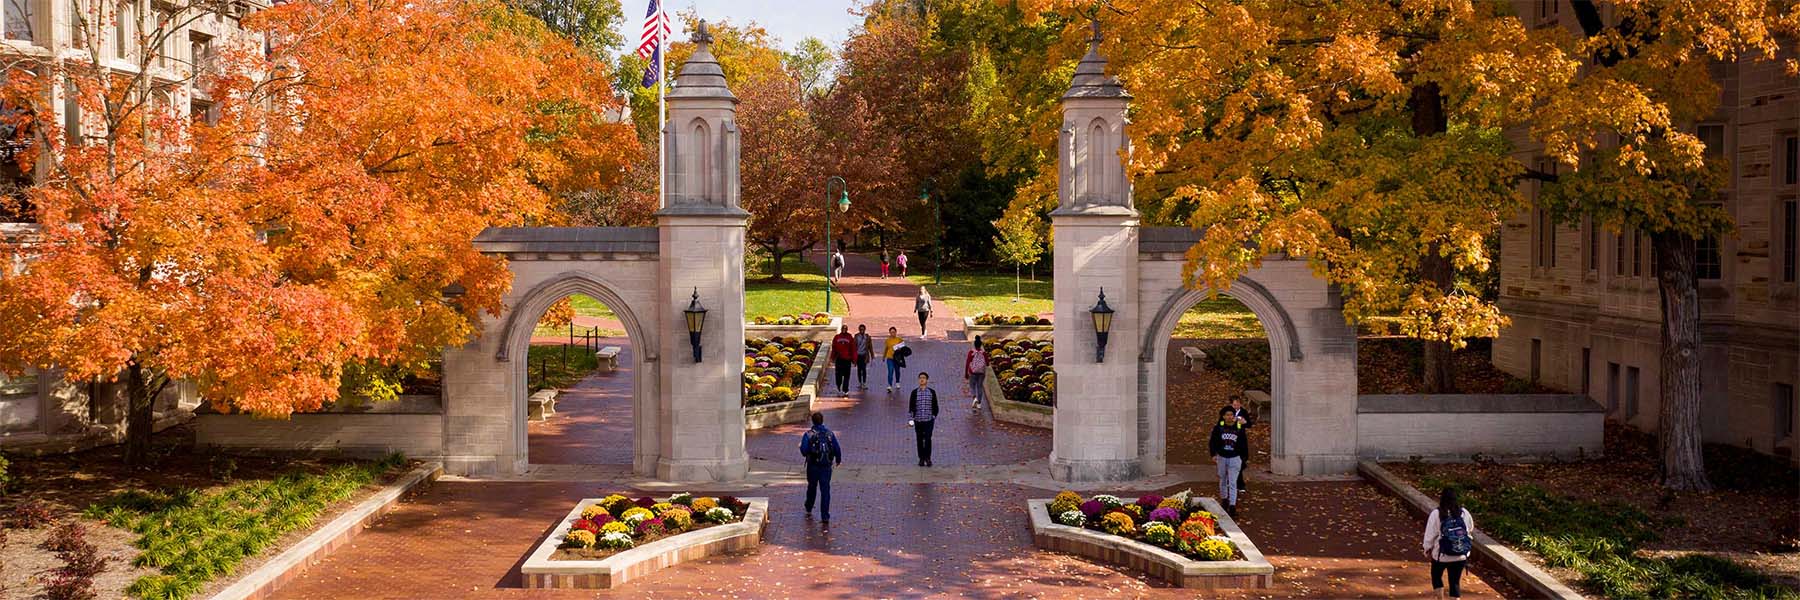 sample gates on the campus of Indiana University in autumn